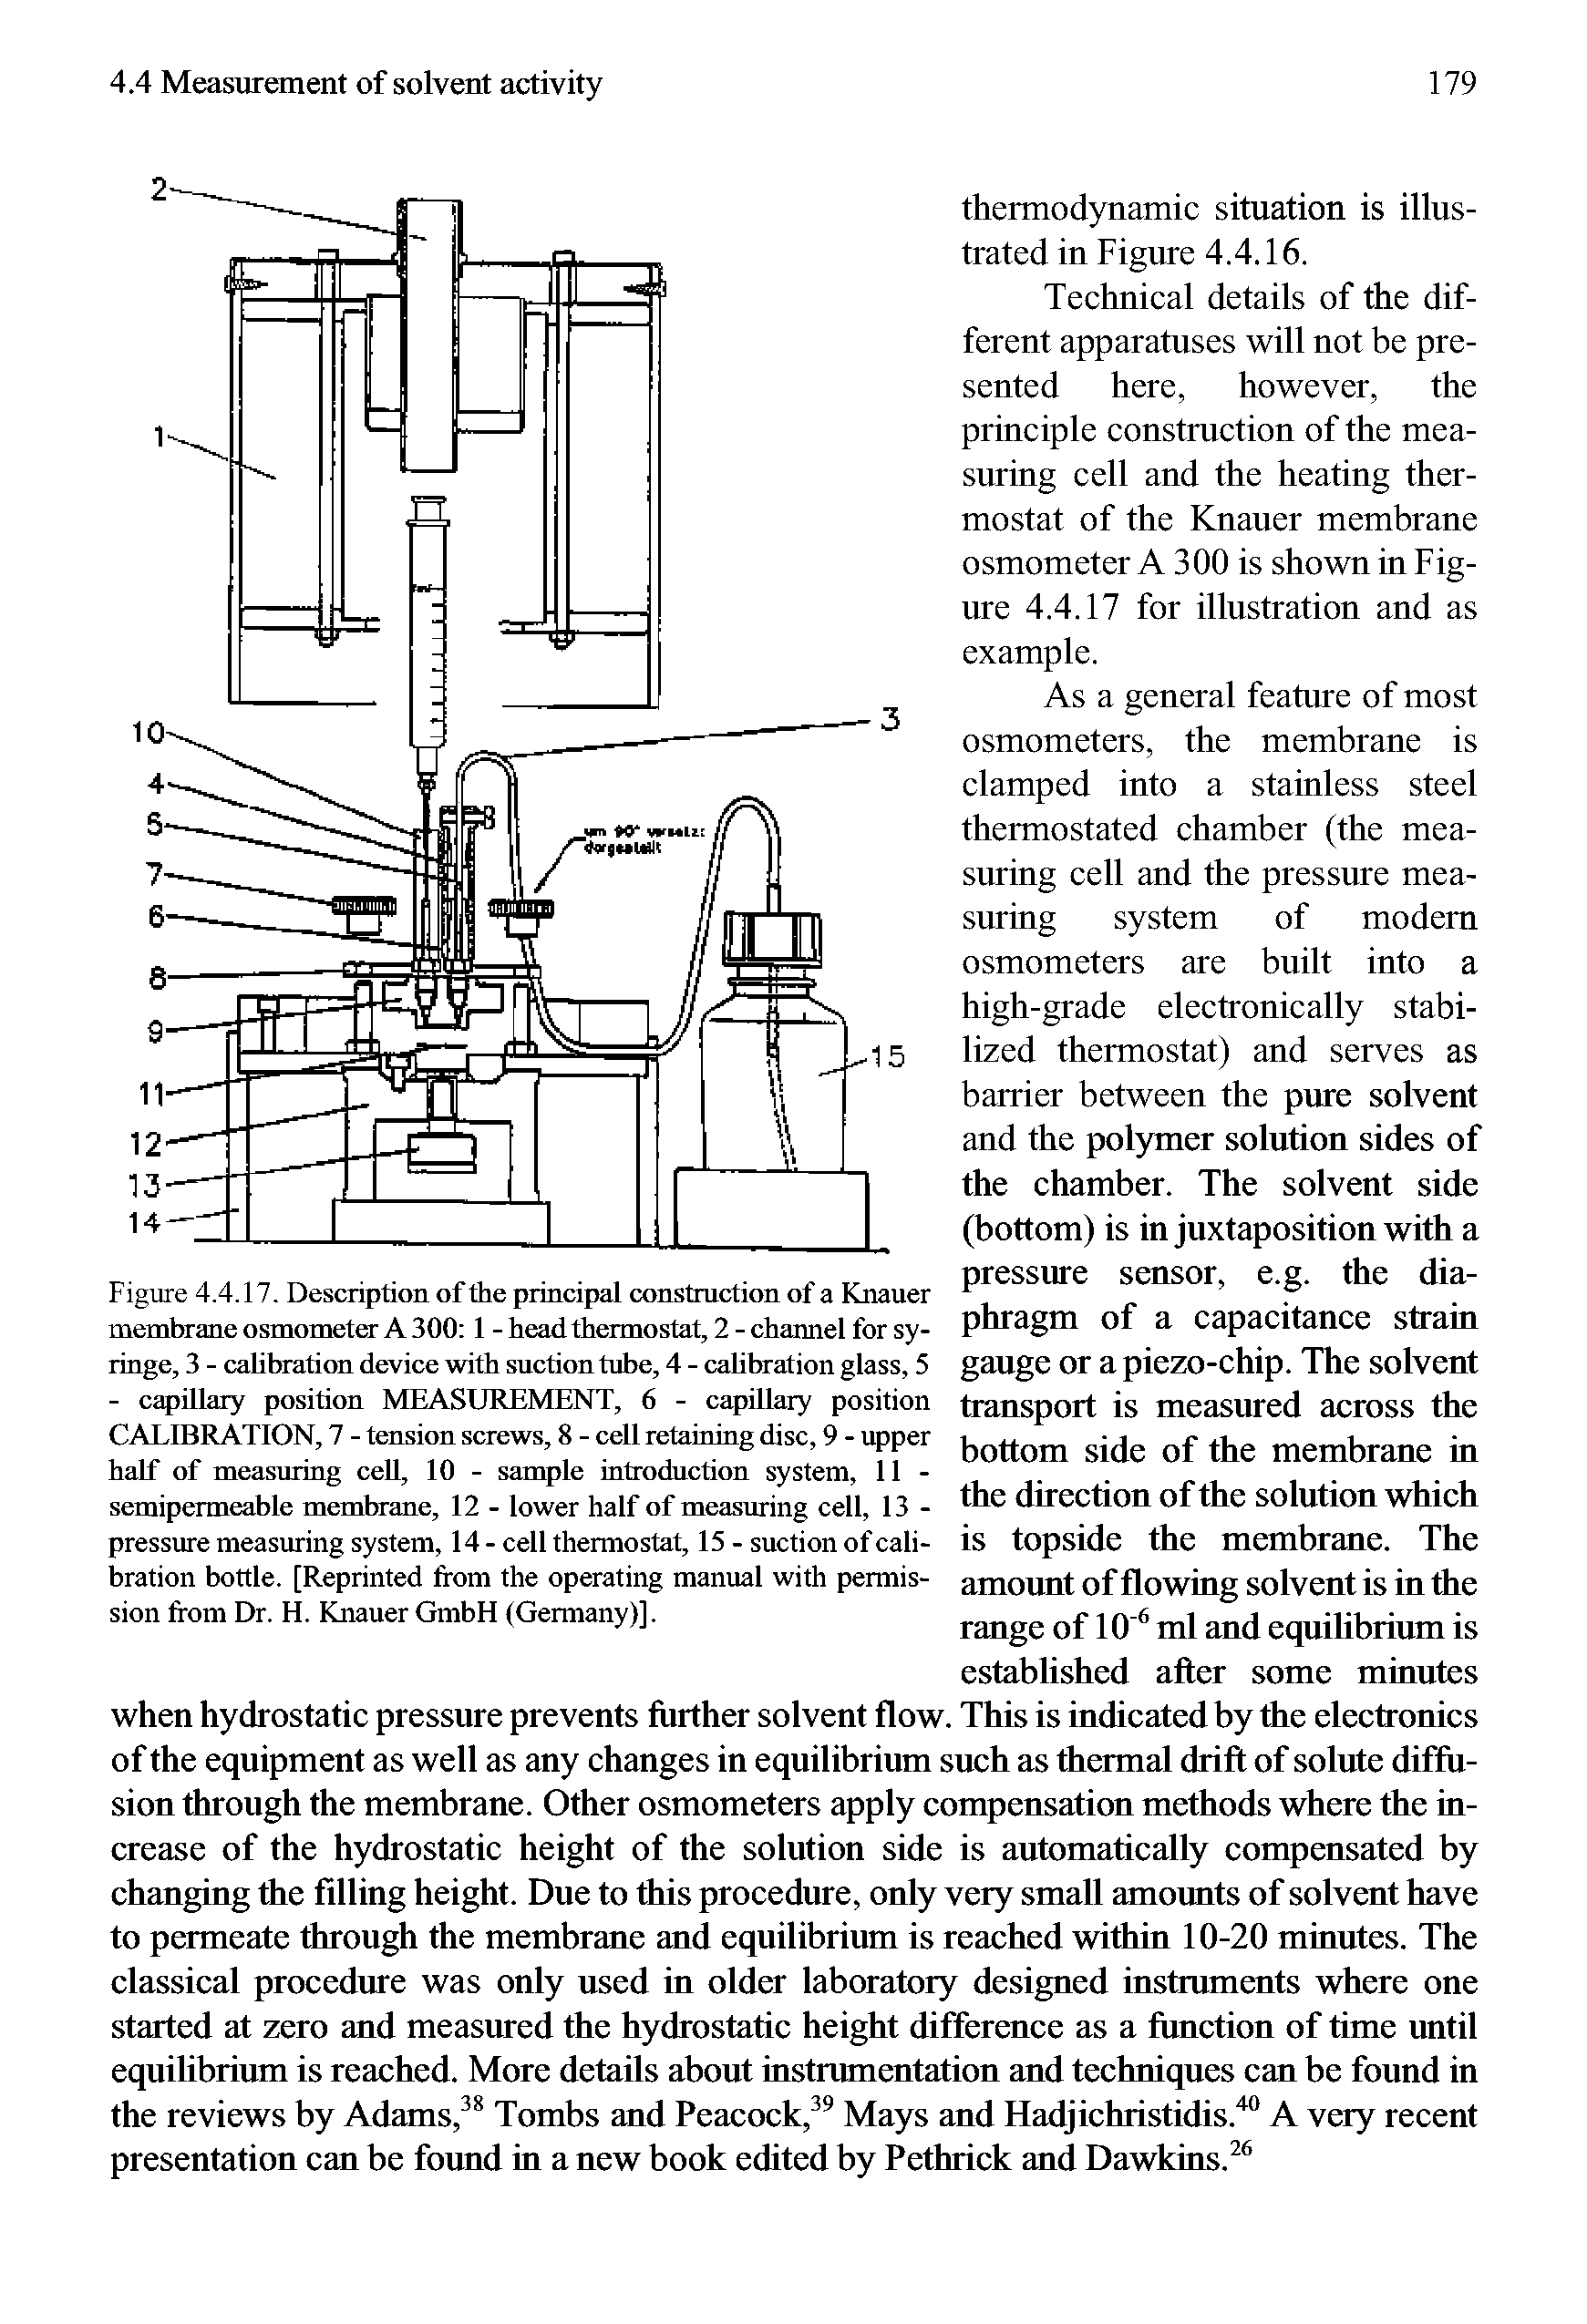 Figure 4.4.17. Description of the principal construction of a Knauer membrane osmometer A 300 1 - head thermostat, 2 - channel for syringe, 3 - calibration device with suction tube, 4 - calibration glass, 5 - c illary position MEASUREMENT, 6 - capillary position CALIBRATION, 7 - tension screws, 8 - cell retaining disc, 9 - upper half of measuring cell, 10 - sample introduction system, 11 -semipermeable membrane, 12 - lower half of measuring cell, 13 -pressure measuring system, 14 - cell thermostat, 15 - suction of calibration bottle. [Reprinted from the operating manual with permission from Dr. H. Knauer GmbH (Germany)].